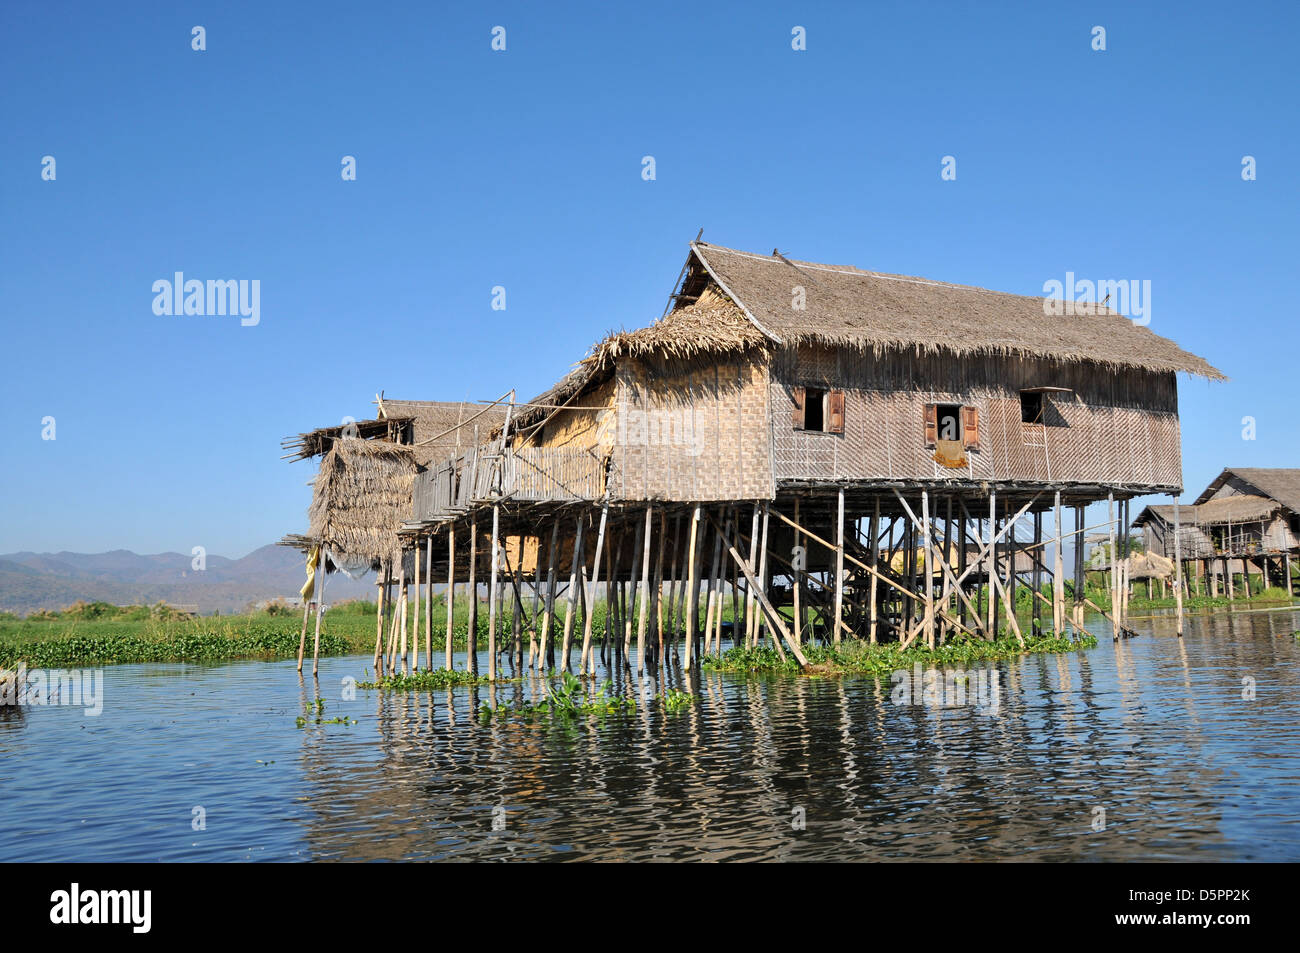 Traditional Stilt House, Inle Lake, Shan State, Myanmar, Southeast Asia Stock Photo